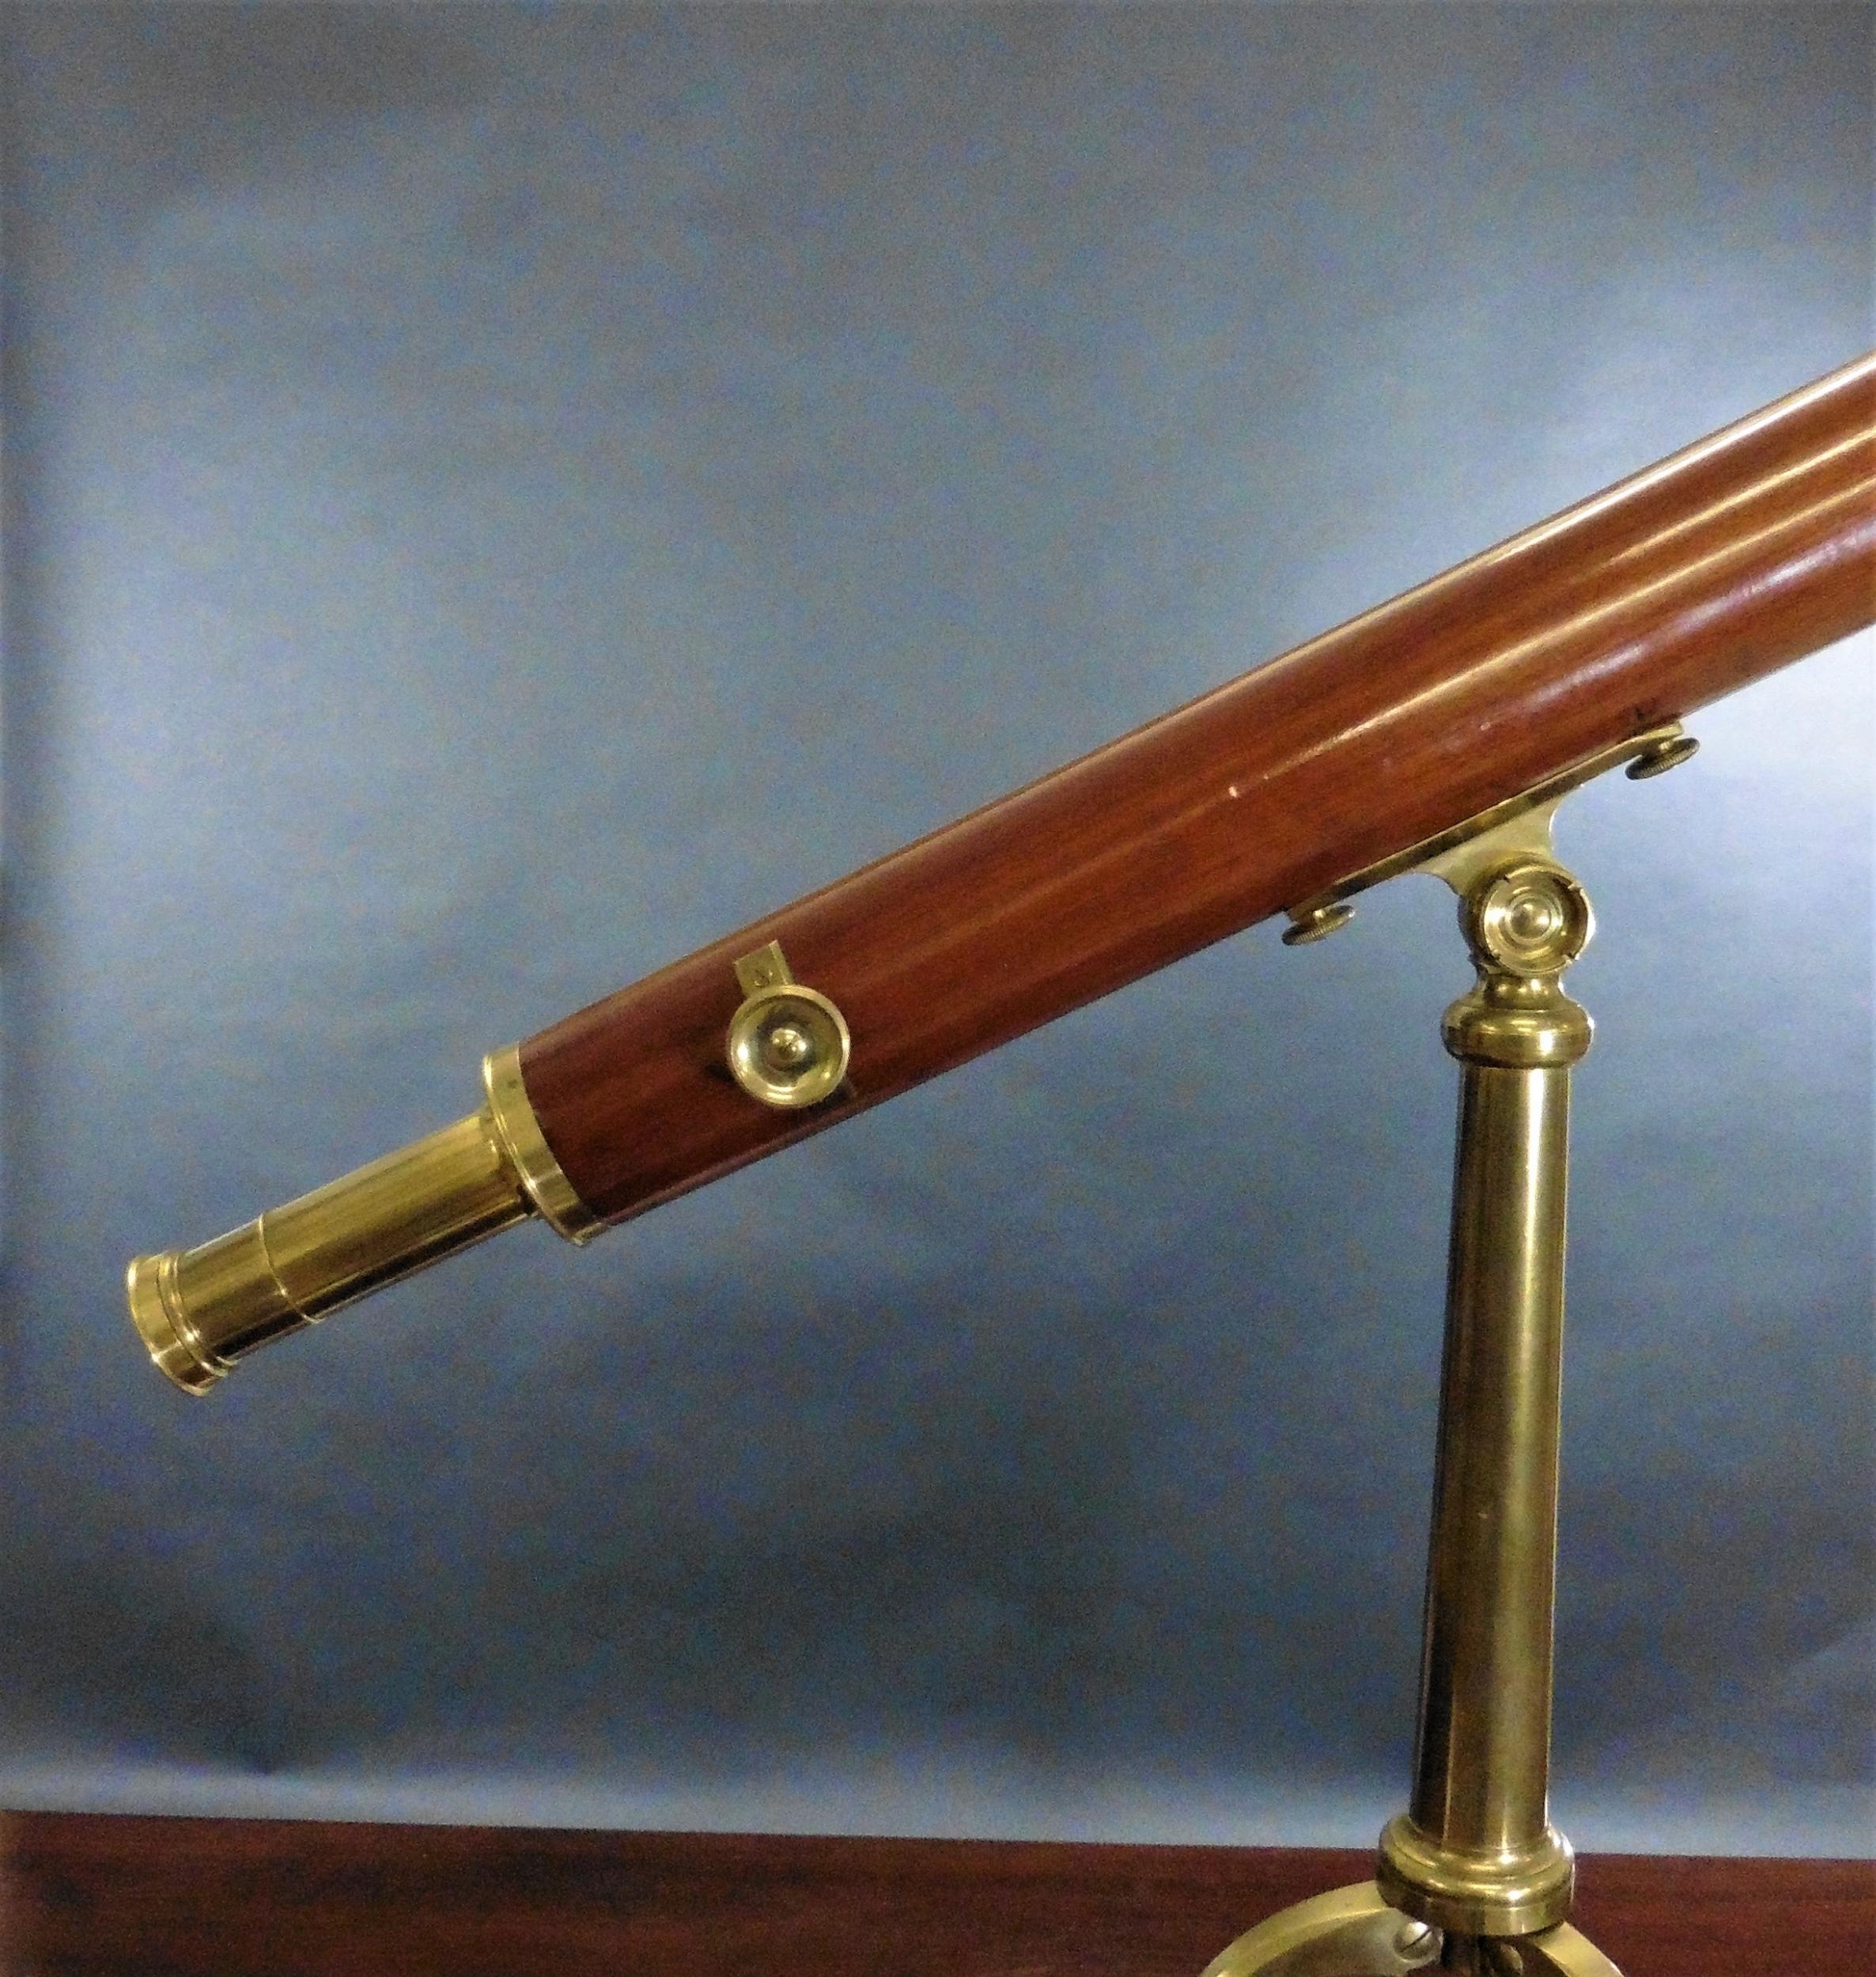 Refracting mahogany telescope signed ‘Watkins, Charing Cross’, C.1810

The telescope retains it's original mahogany carrying case.

Jeremiah Watkins is listed in Barometer makers and retailers by Edwin Banfield as working from 1799-1819.